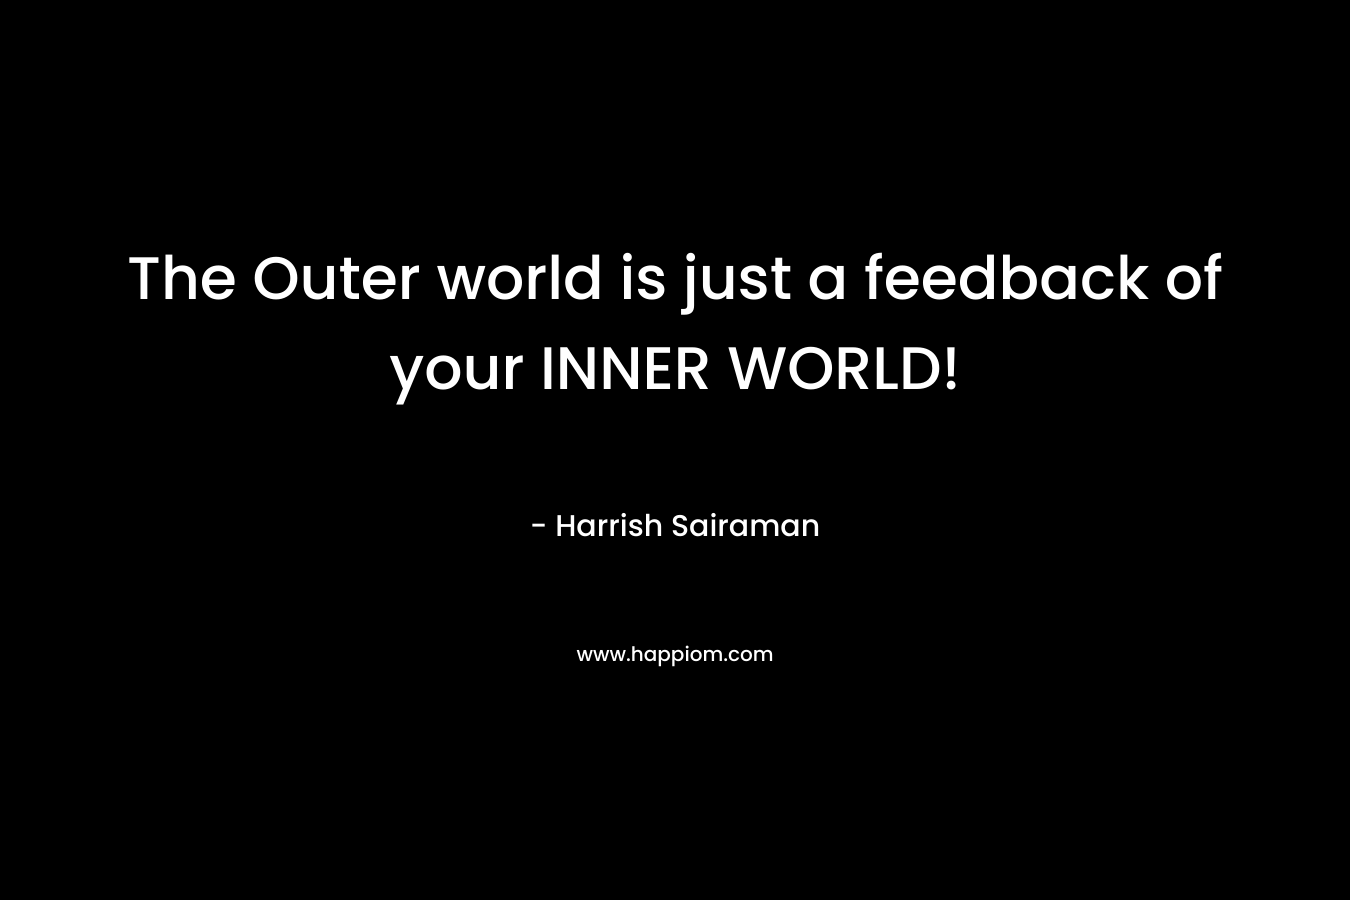 The Outer world is just a feedback of your INNER WORLD!